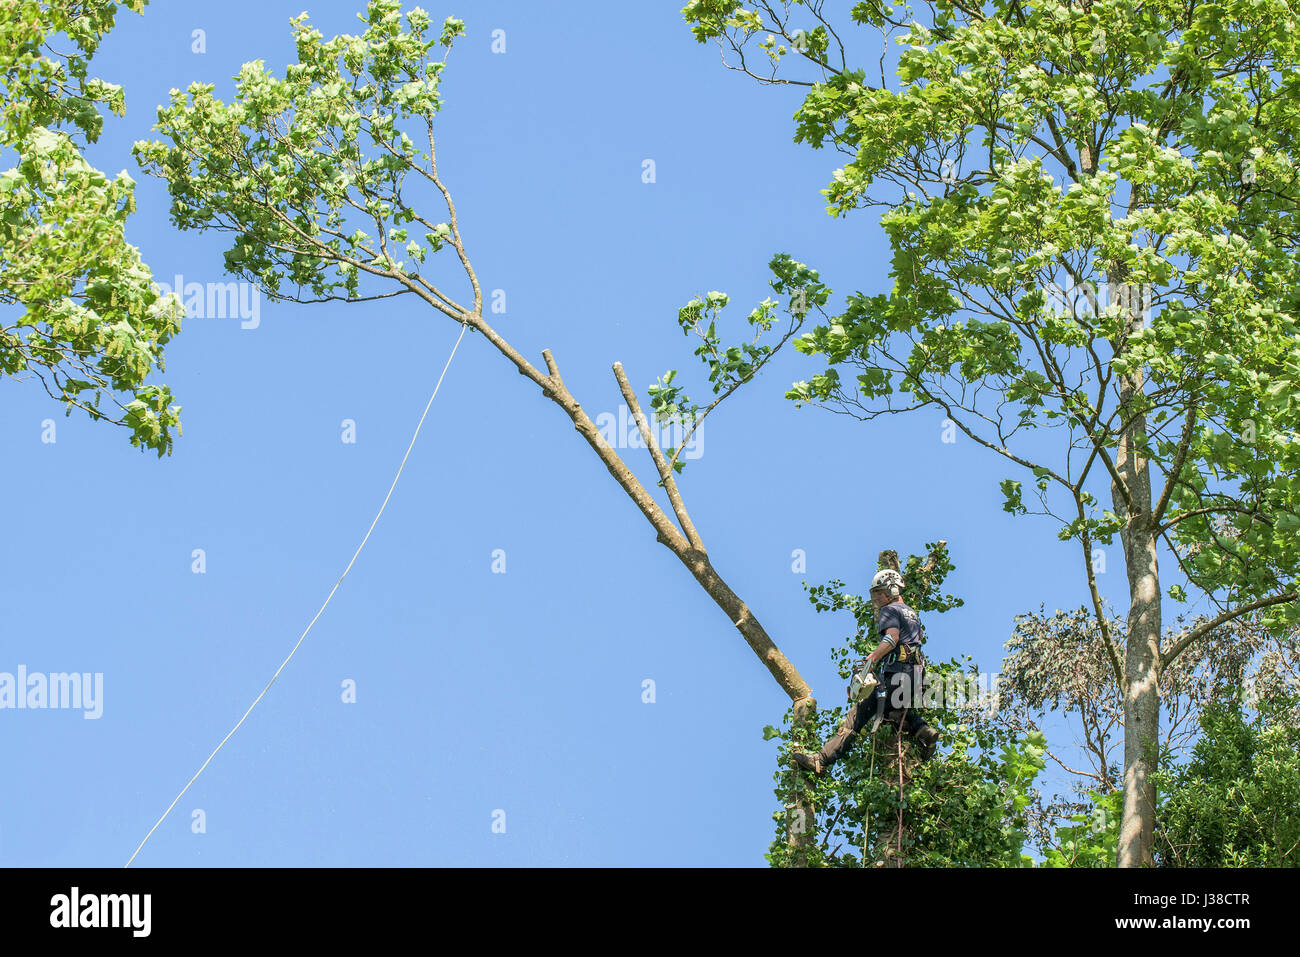 Tree surgeon Arboriculturist Climbing Tree Branches Foliage Rope Ropes Roped Arborist Safety harness Manual worker Protective workwear Stock Photo